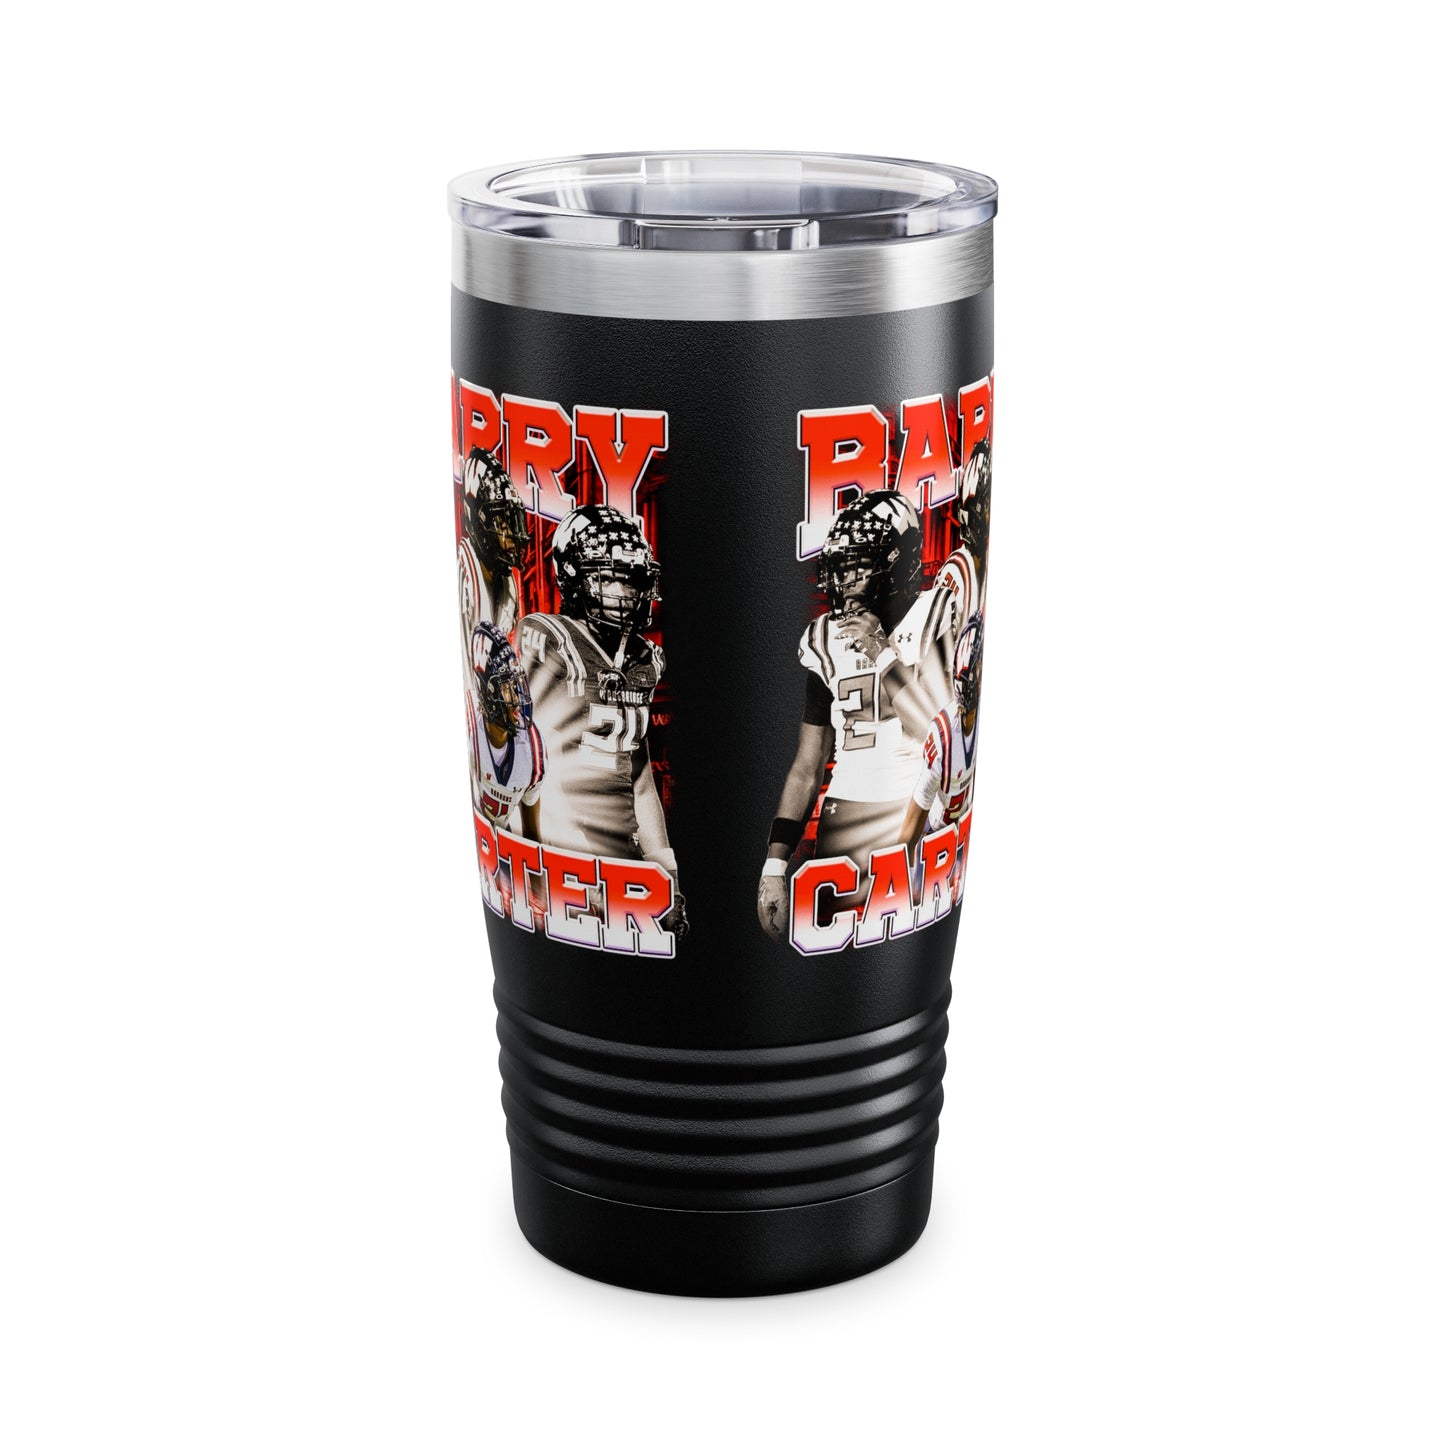 Barry Carter Stainless Steel Tumbler